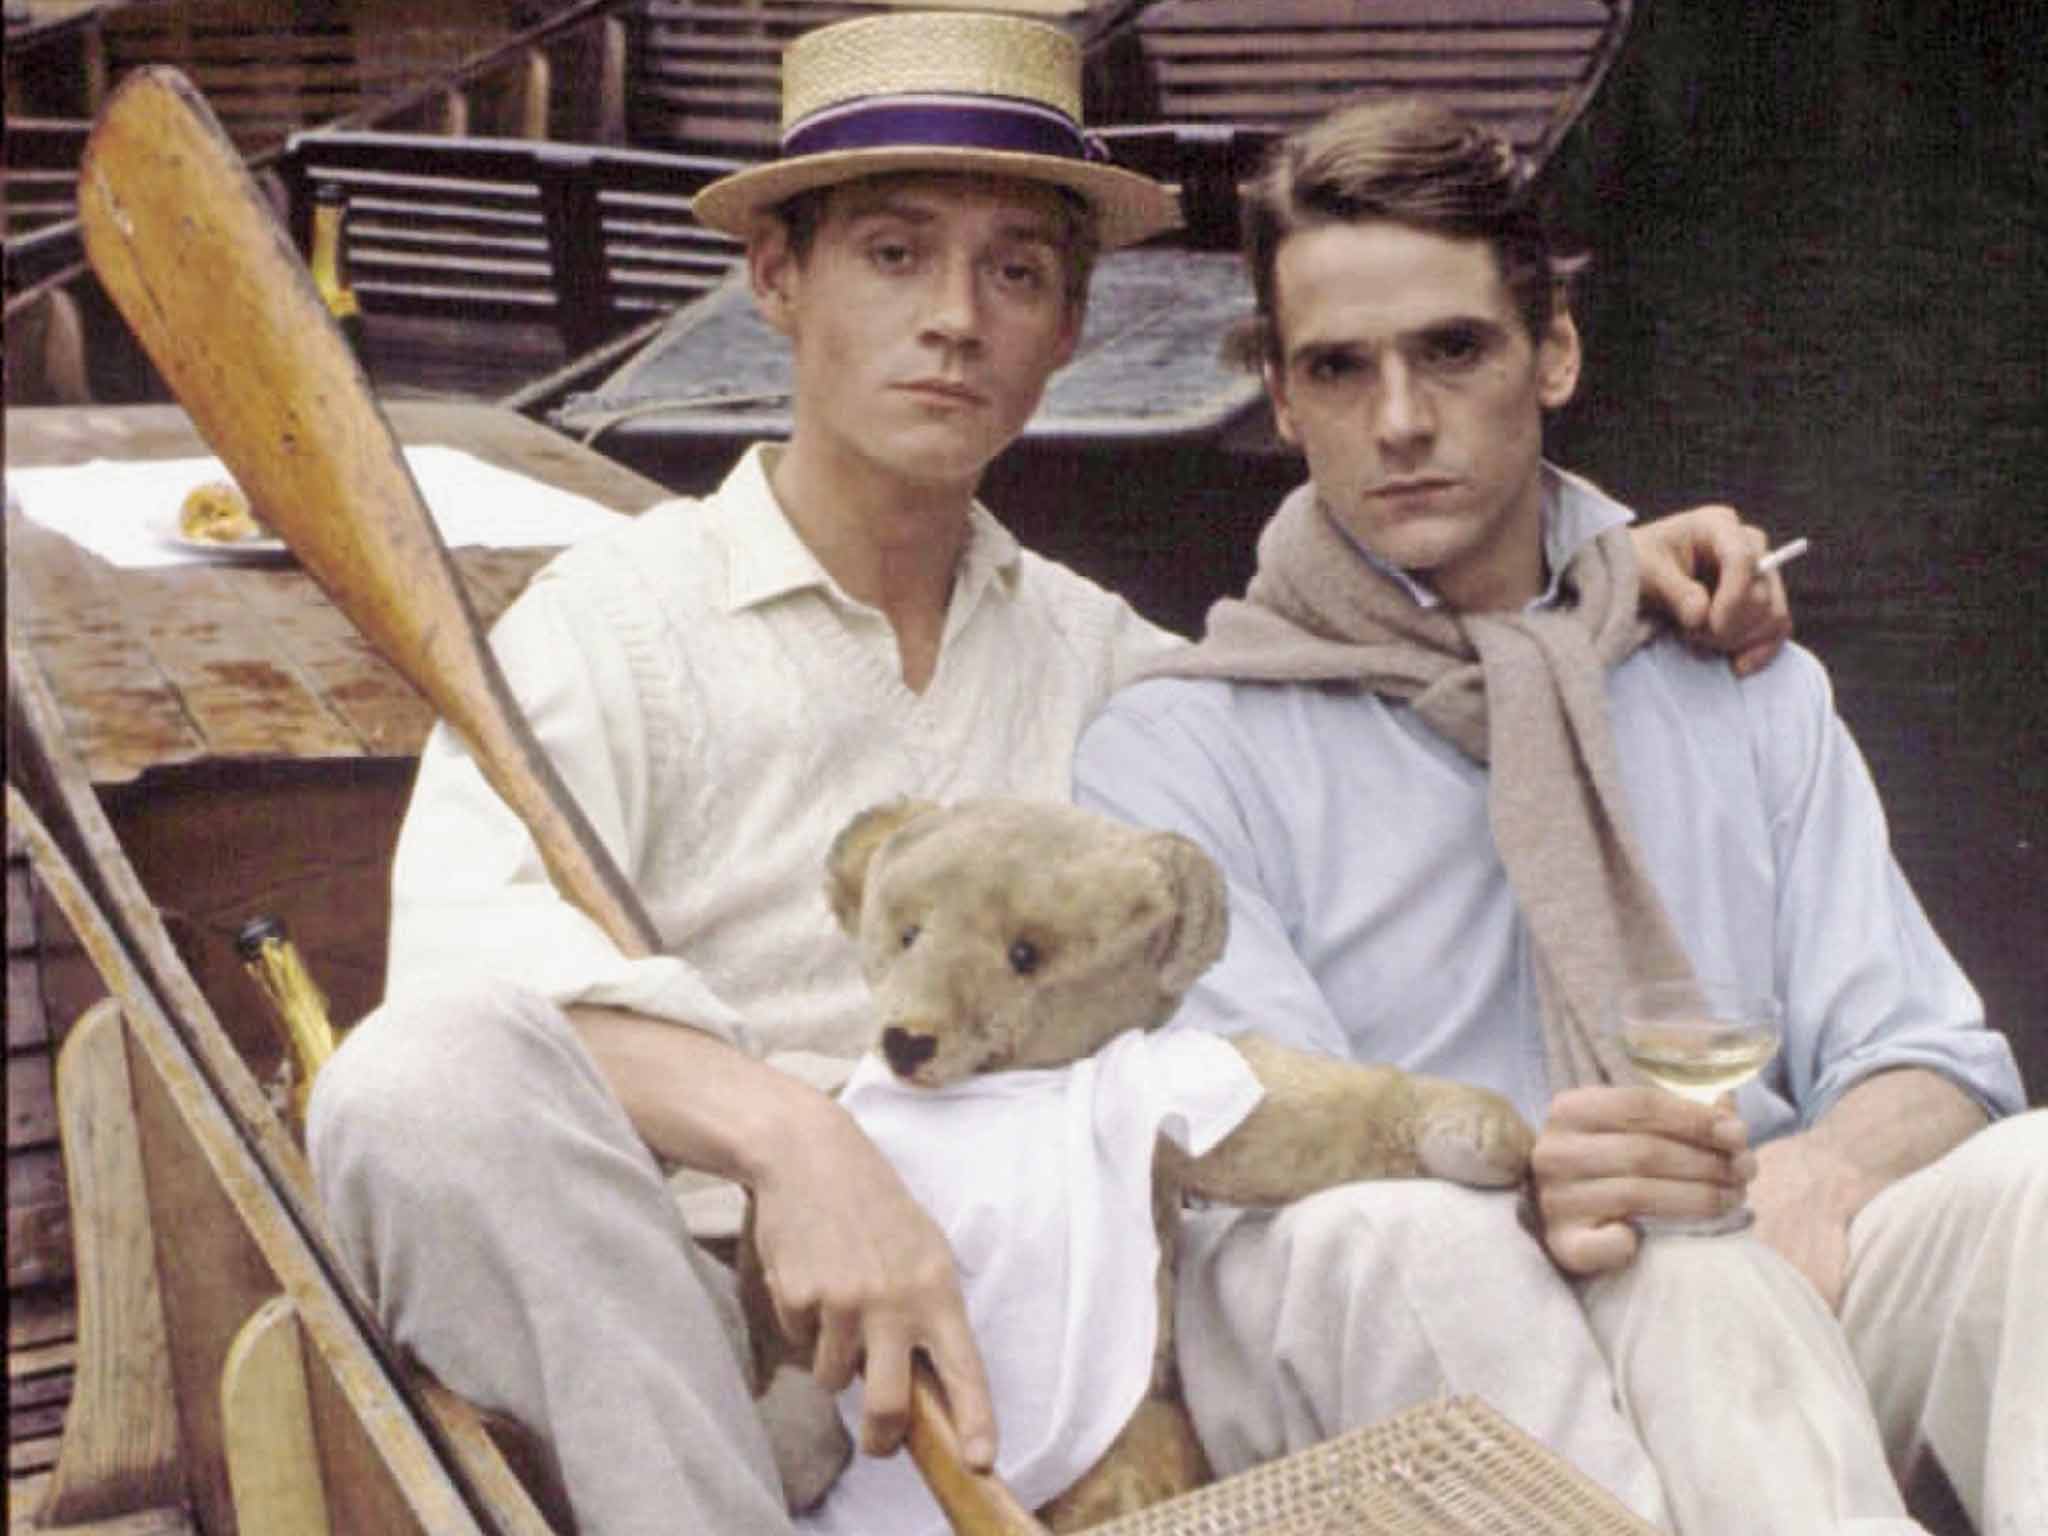 Bearing up: Sebastian Flyte with his teddy Aloysius in Brideshead Revisited